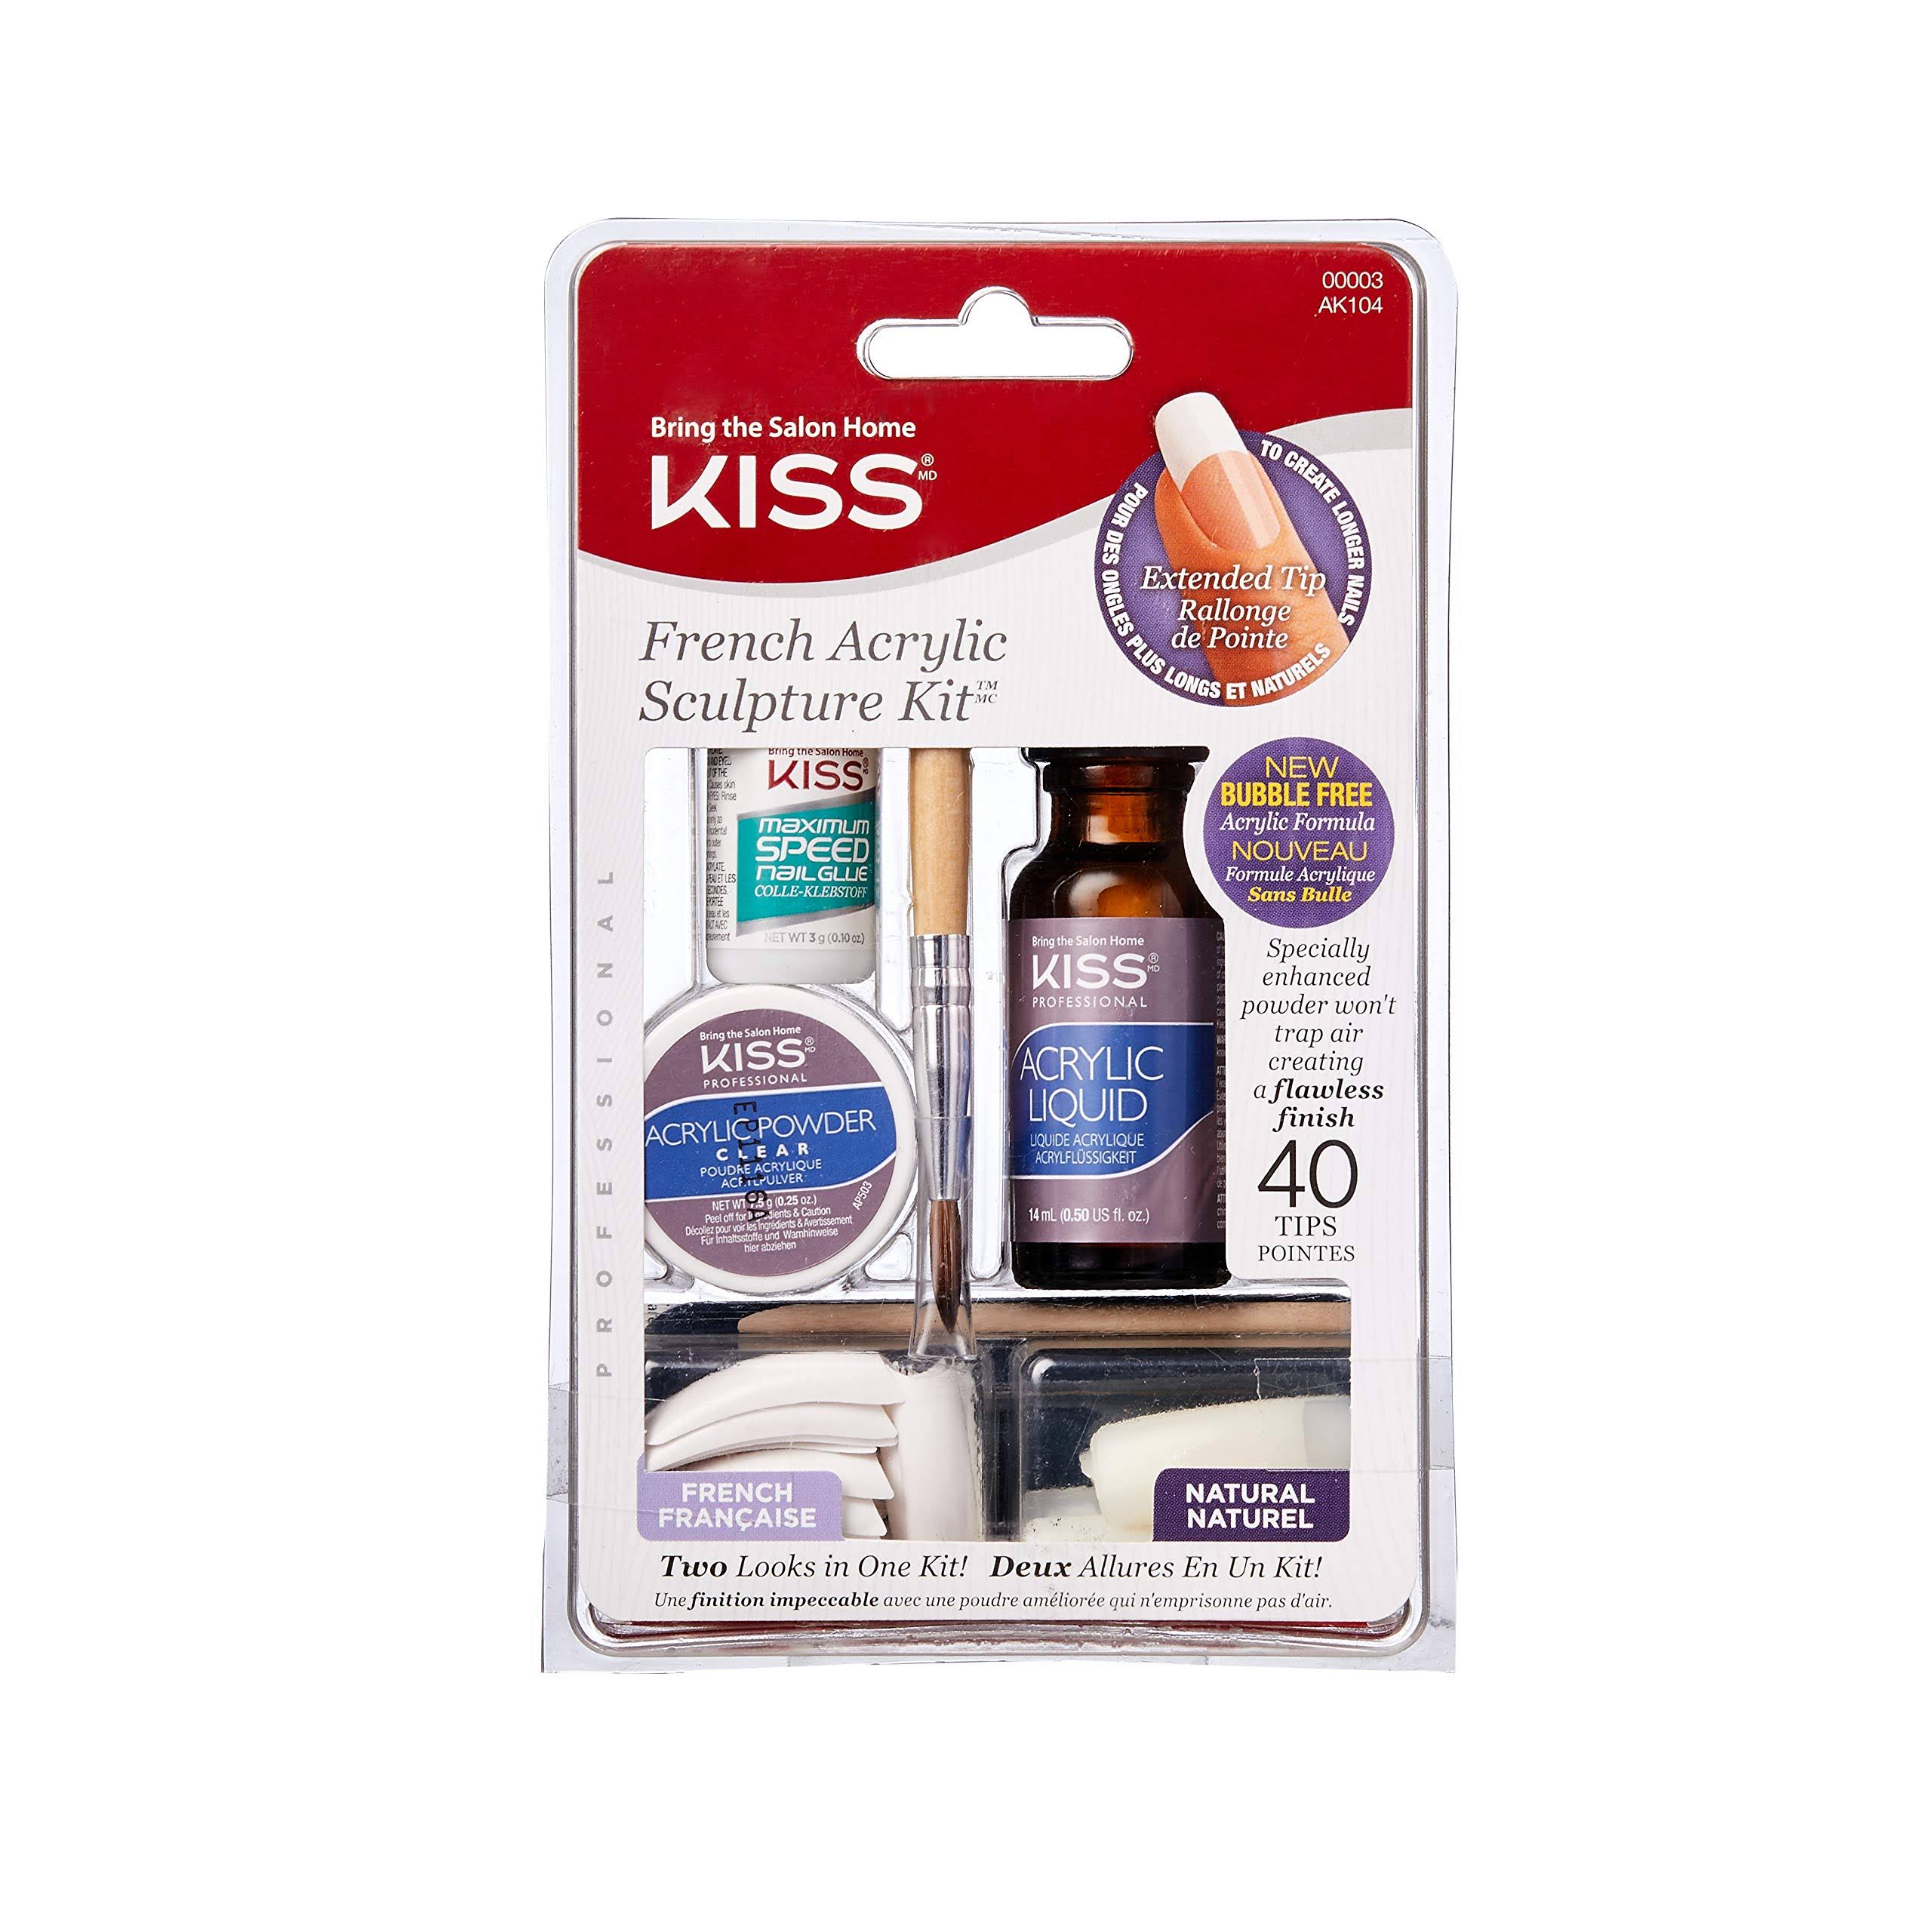 Kiss French Acrylic Sculpture Kit - 40 Tips